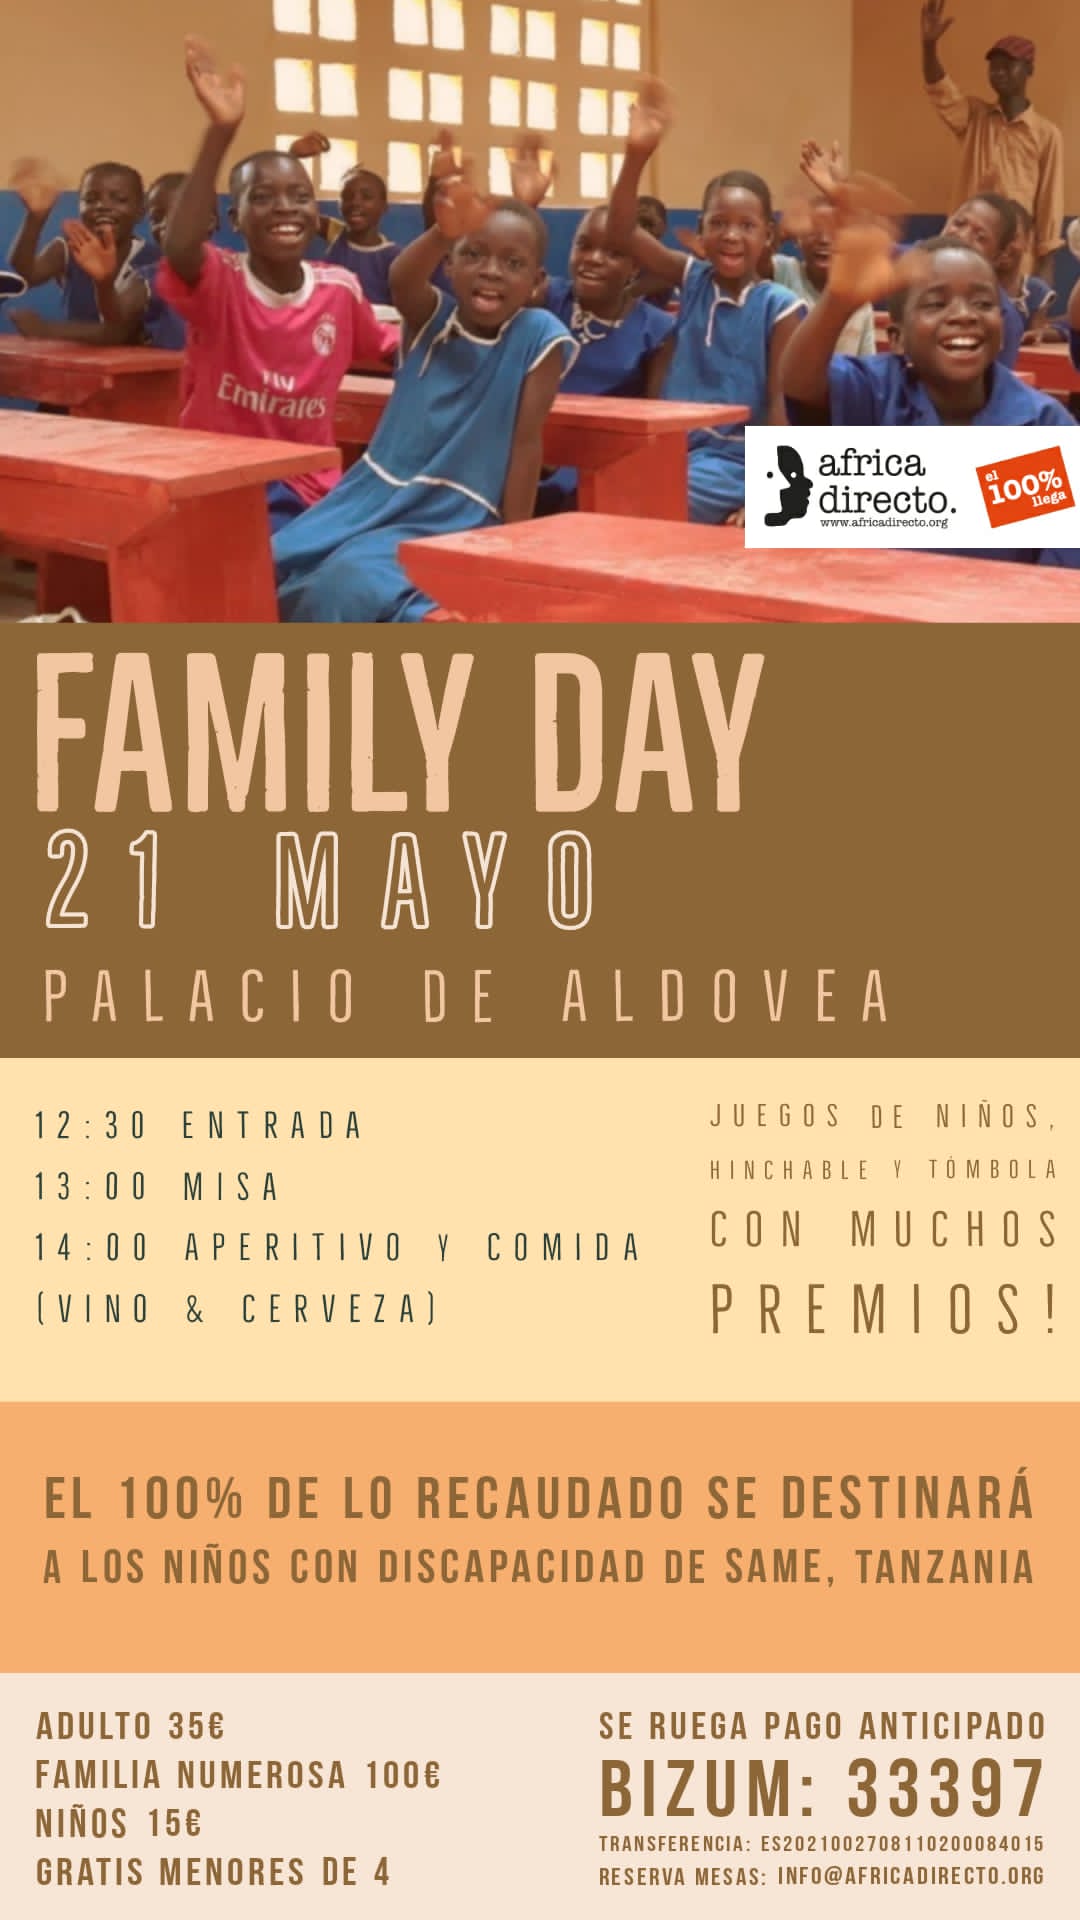 family day